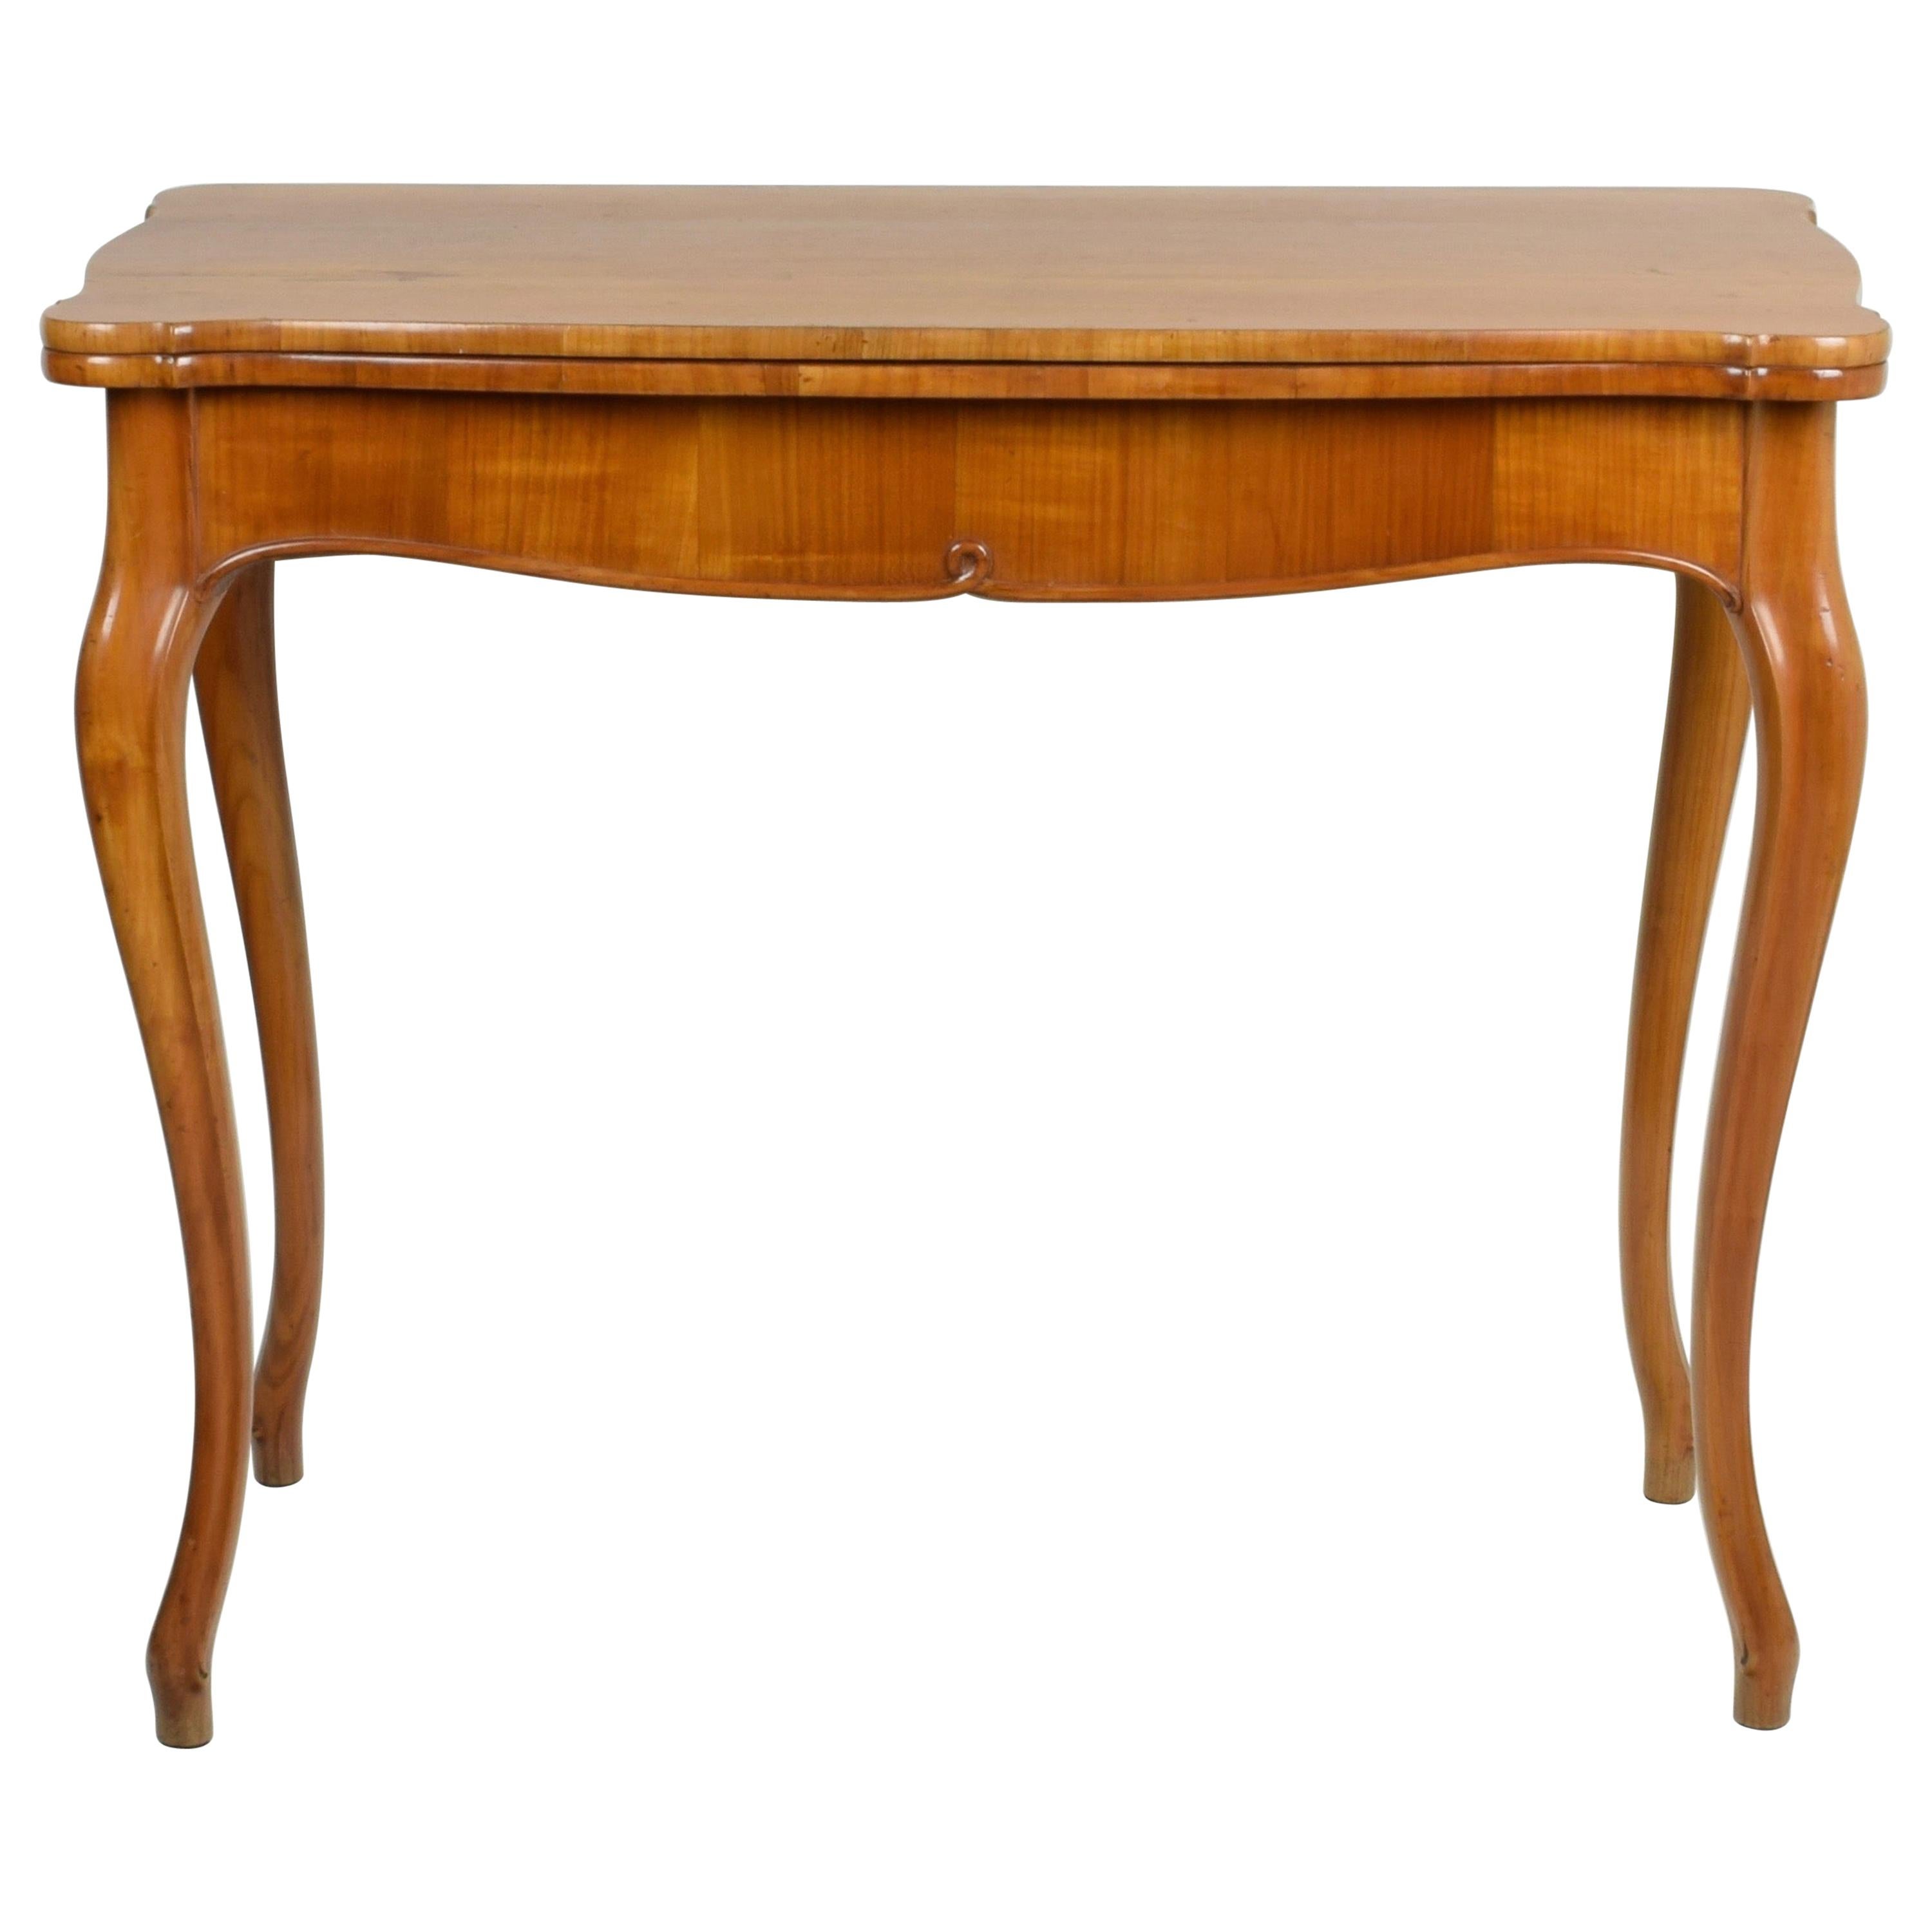 Italian Console Game Table in Cherry Wood, Mid-19th Century For Sale